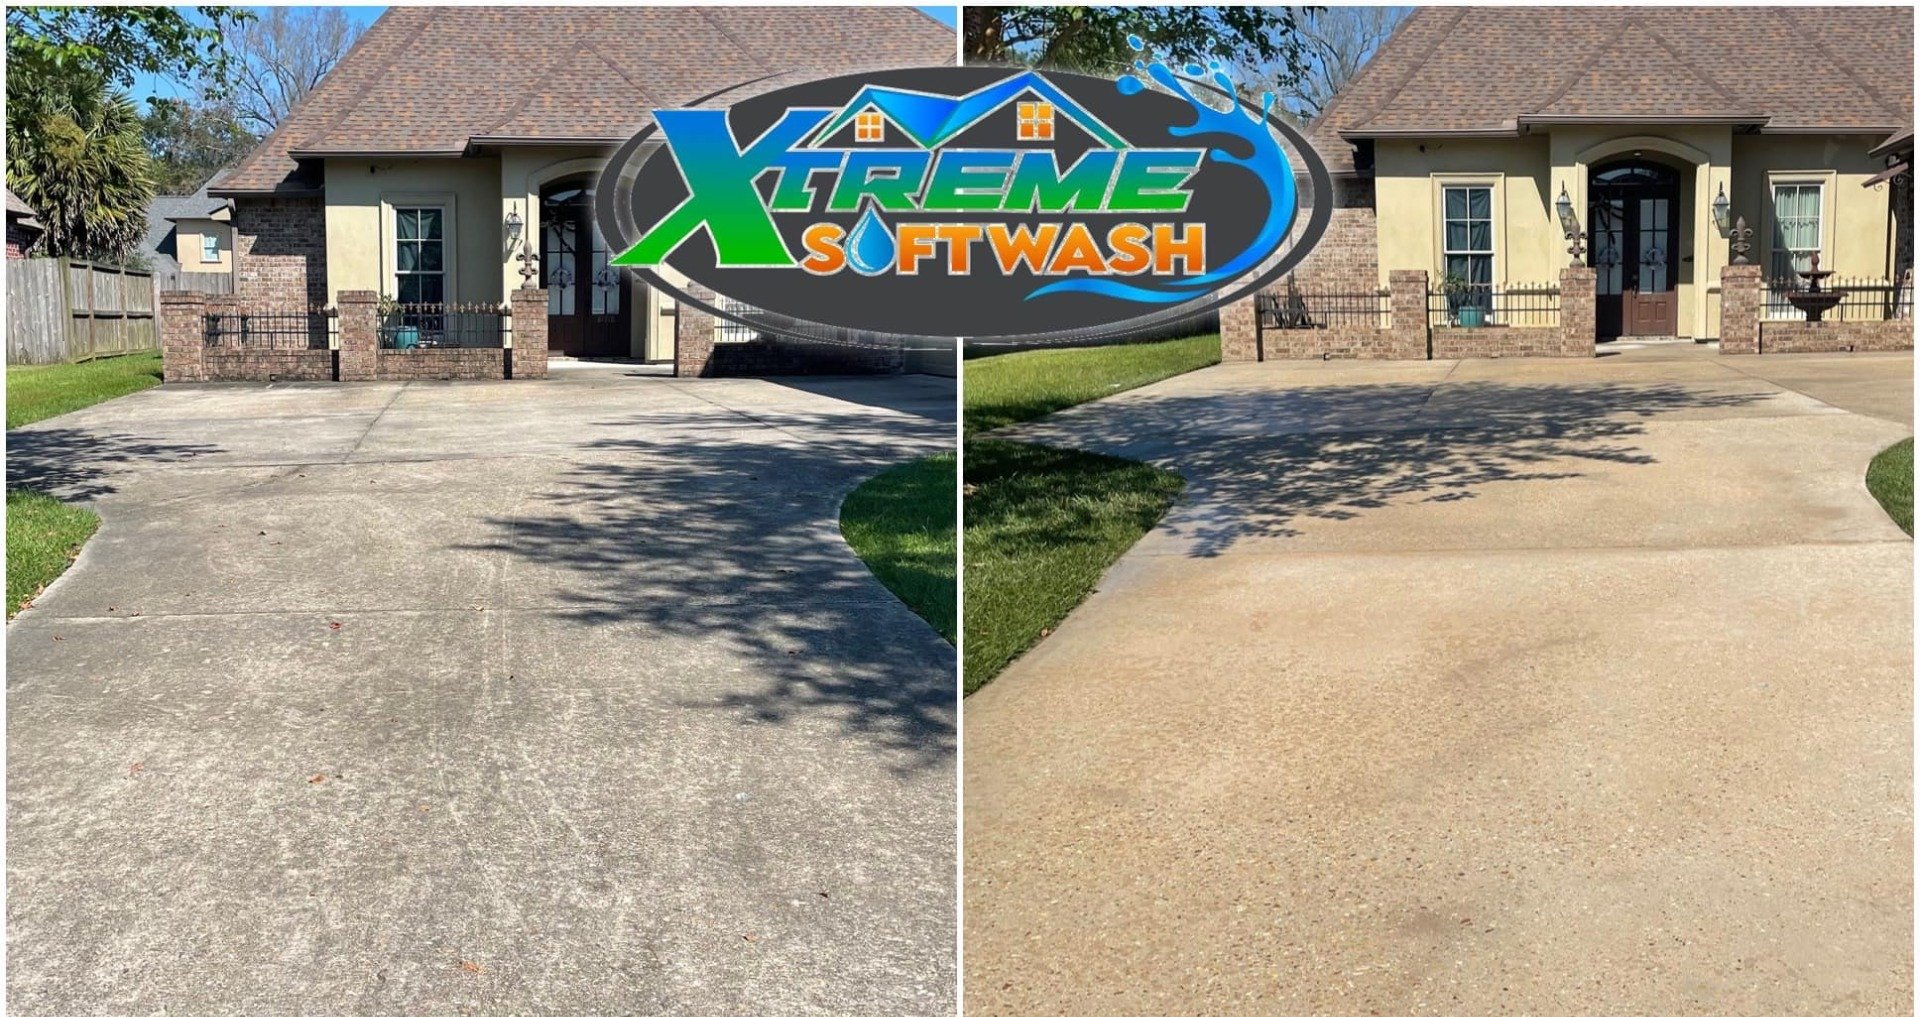 concrete sidewalk driveway pressure and soft wash cleaning in Louisiana